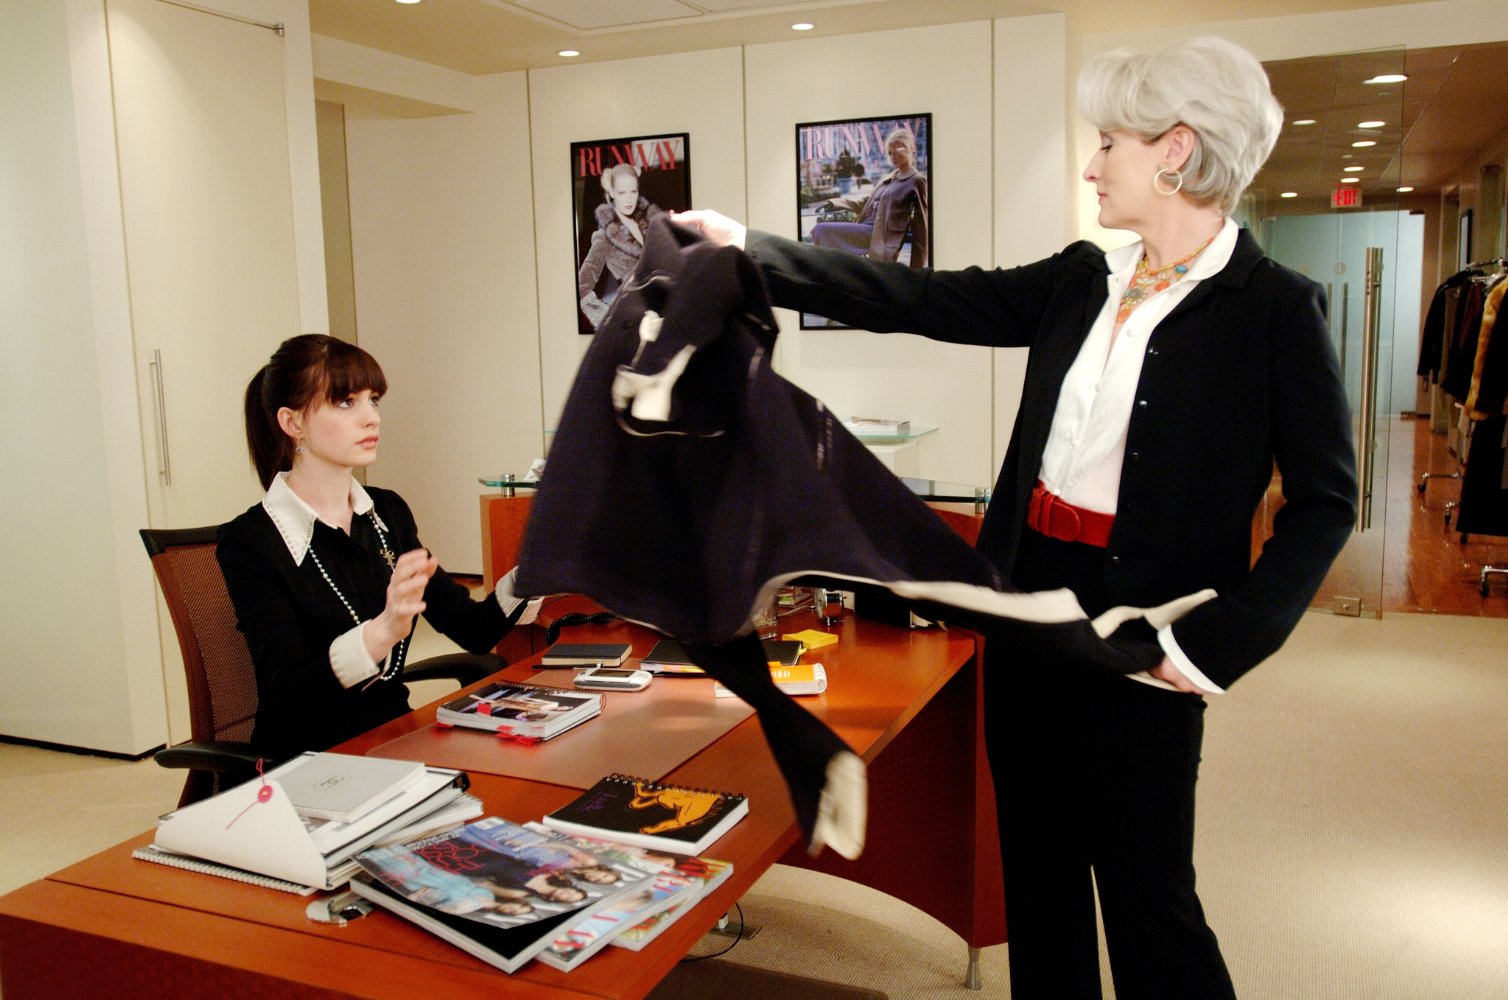 PHOTO: Meryl Streep and Anne Hathaway appear in a scene from "The Devil Wears Prada."